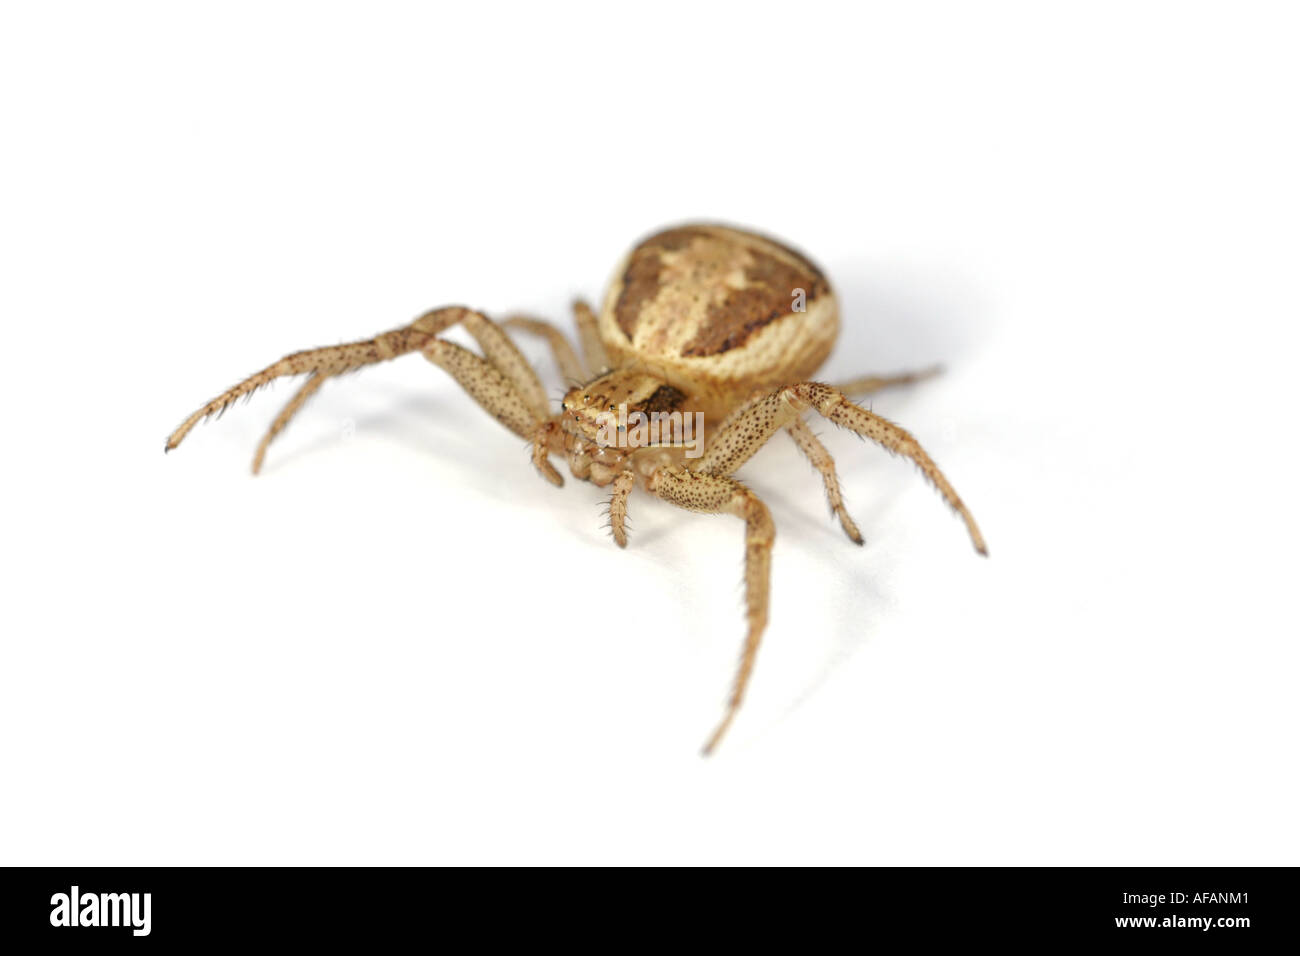 Crab spider Xysticus ulmi on white background Stock Photo